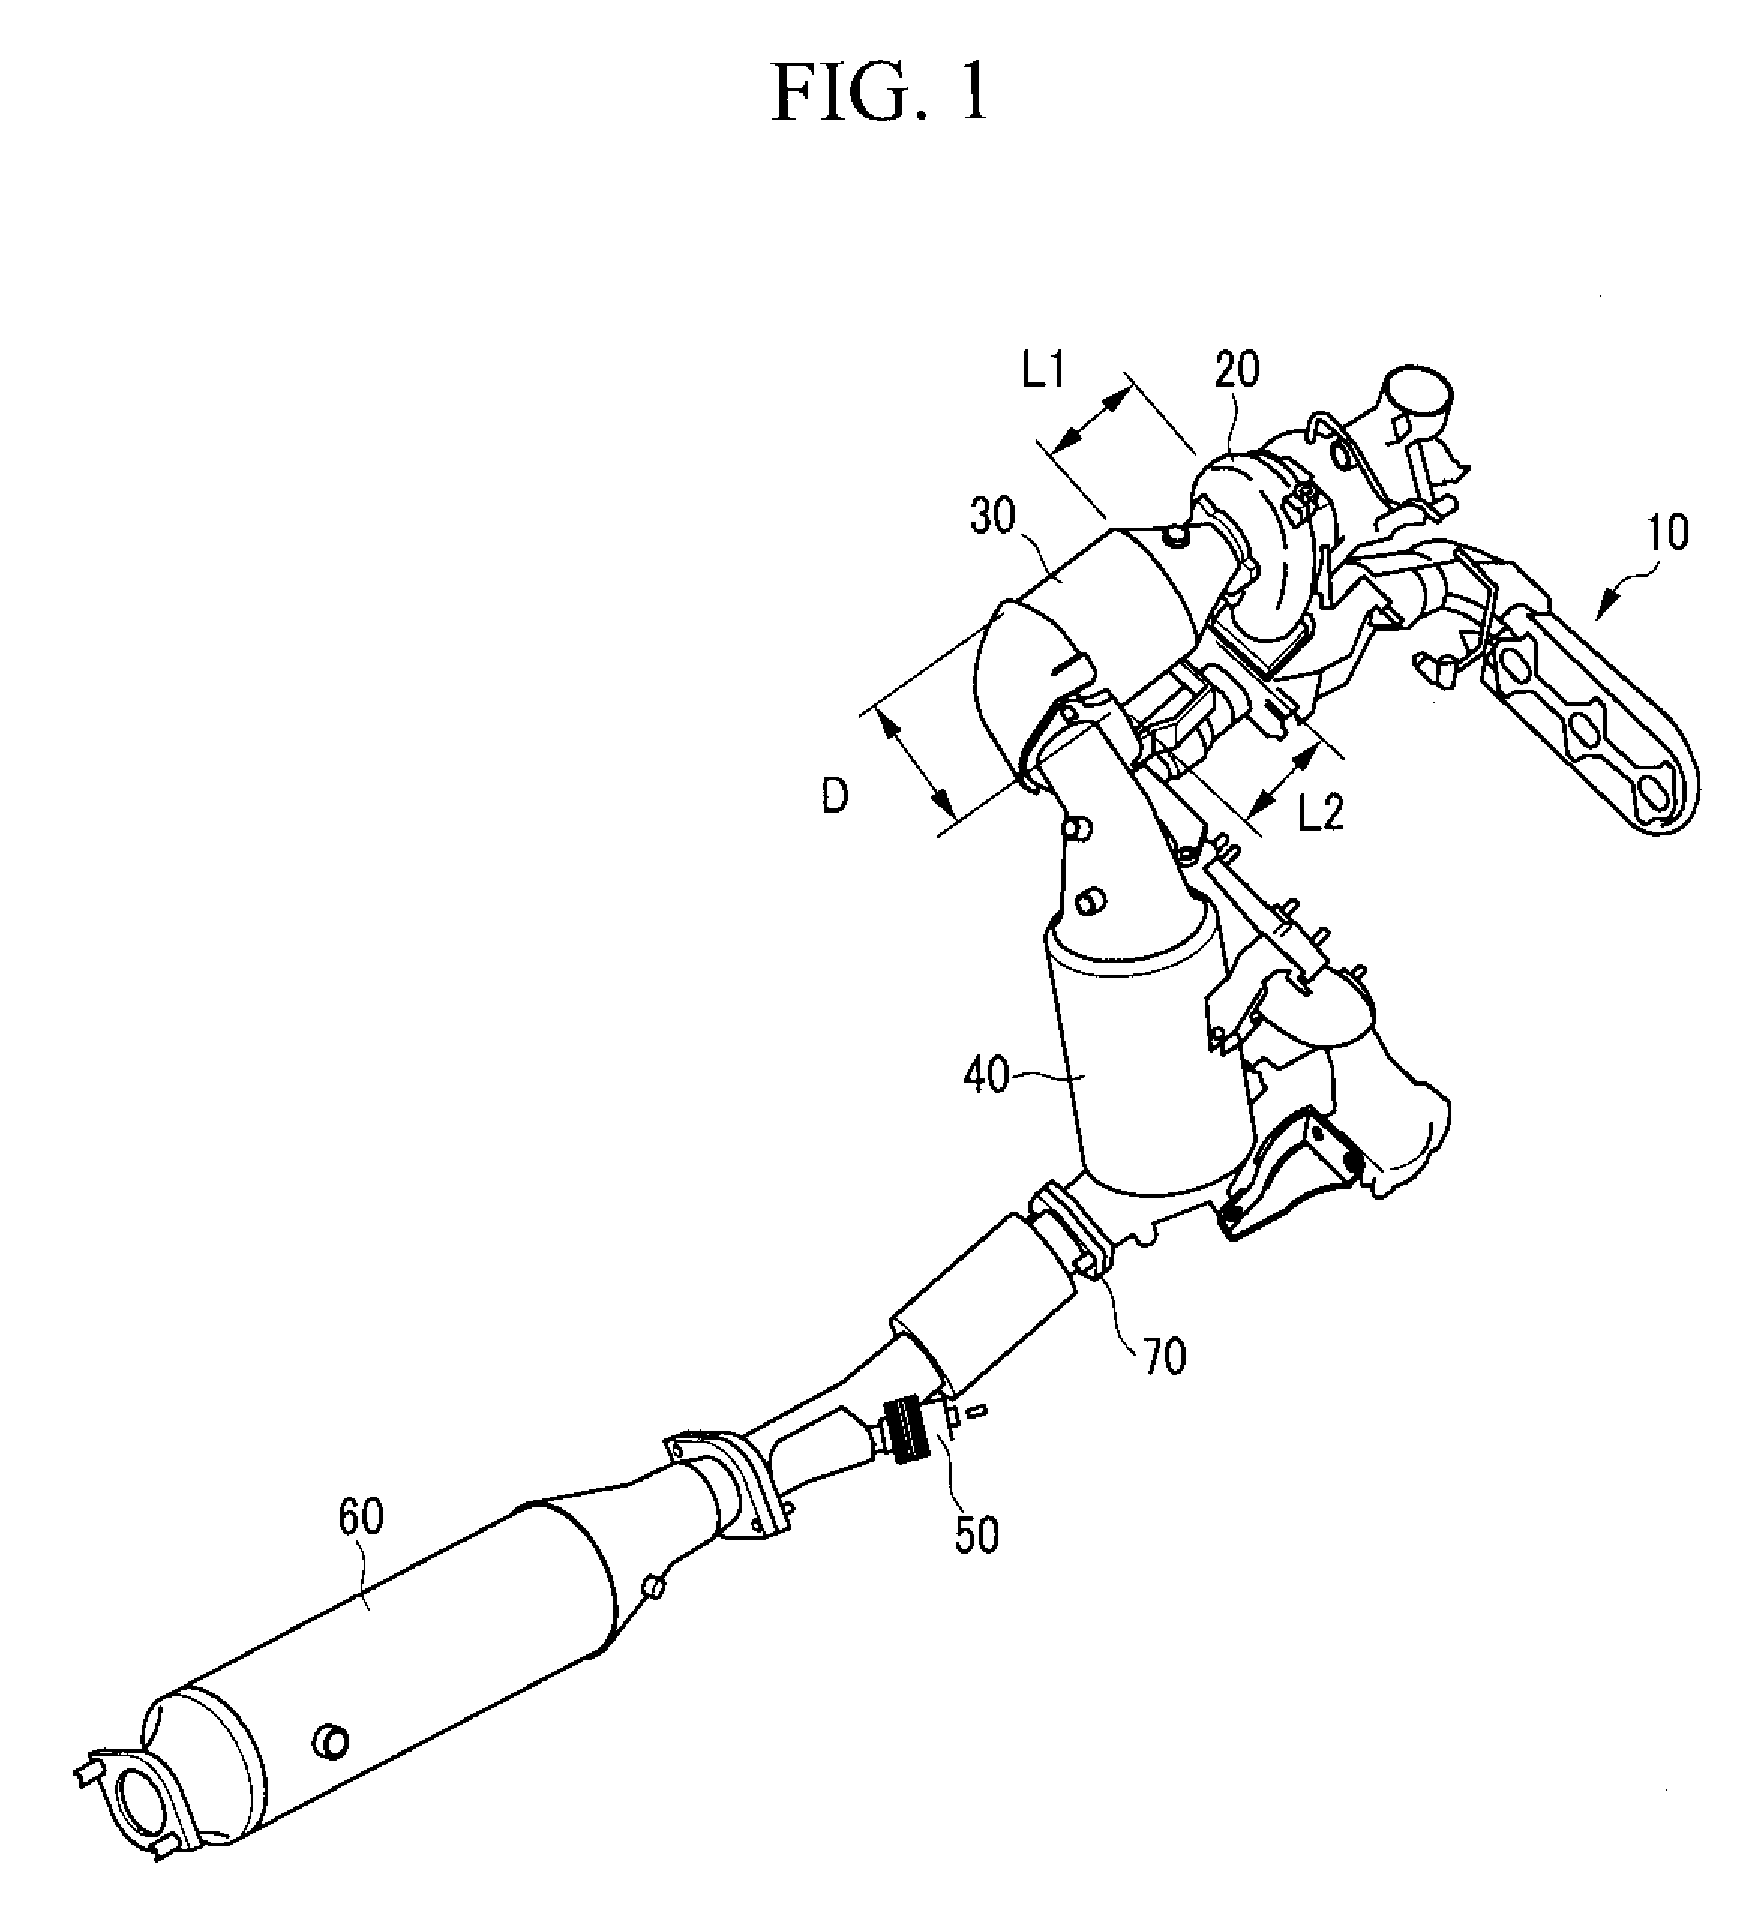 Apparatus for reducing nitrogen oxide contained in exhaust gas